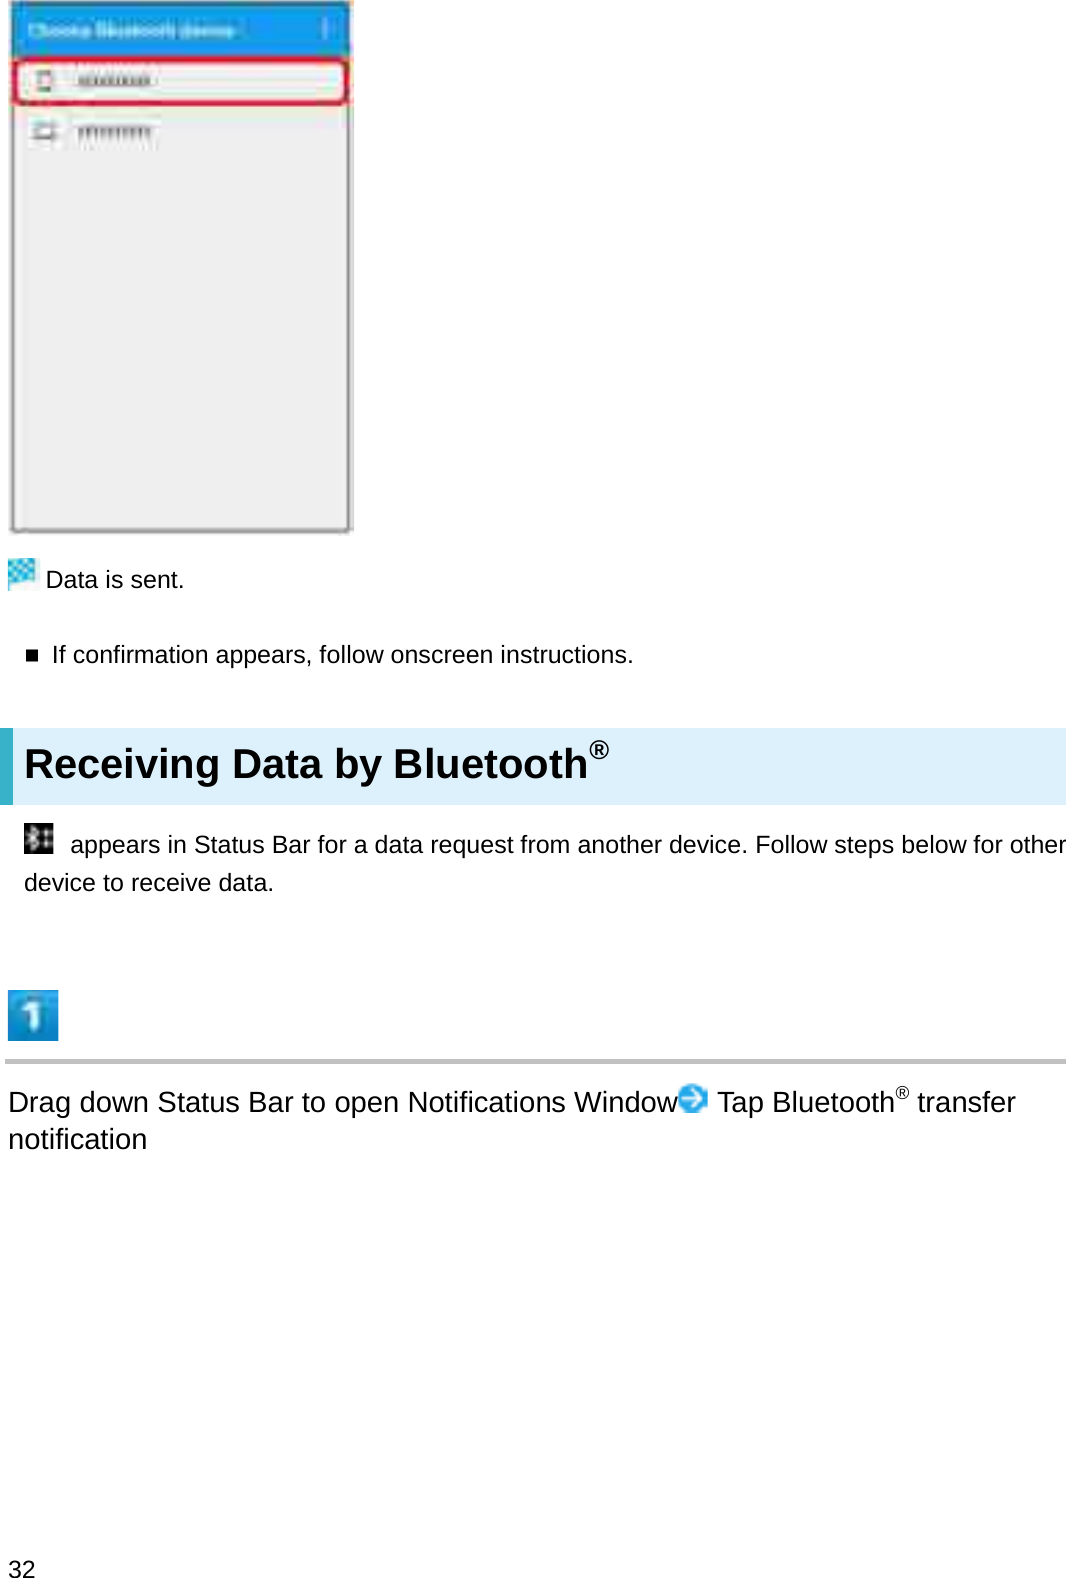 Data is sent.If confirmation appears, follow onscreen instructions.Receiving Data by Bluetooth®appears in Status Bar for a data request from another device. Follow steps below for other device to receive data.Drag down Status Bar to open Notifications Window Tap Bluetooth®transfer notification32